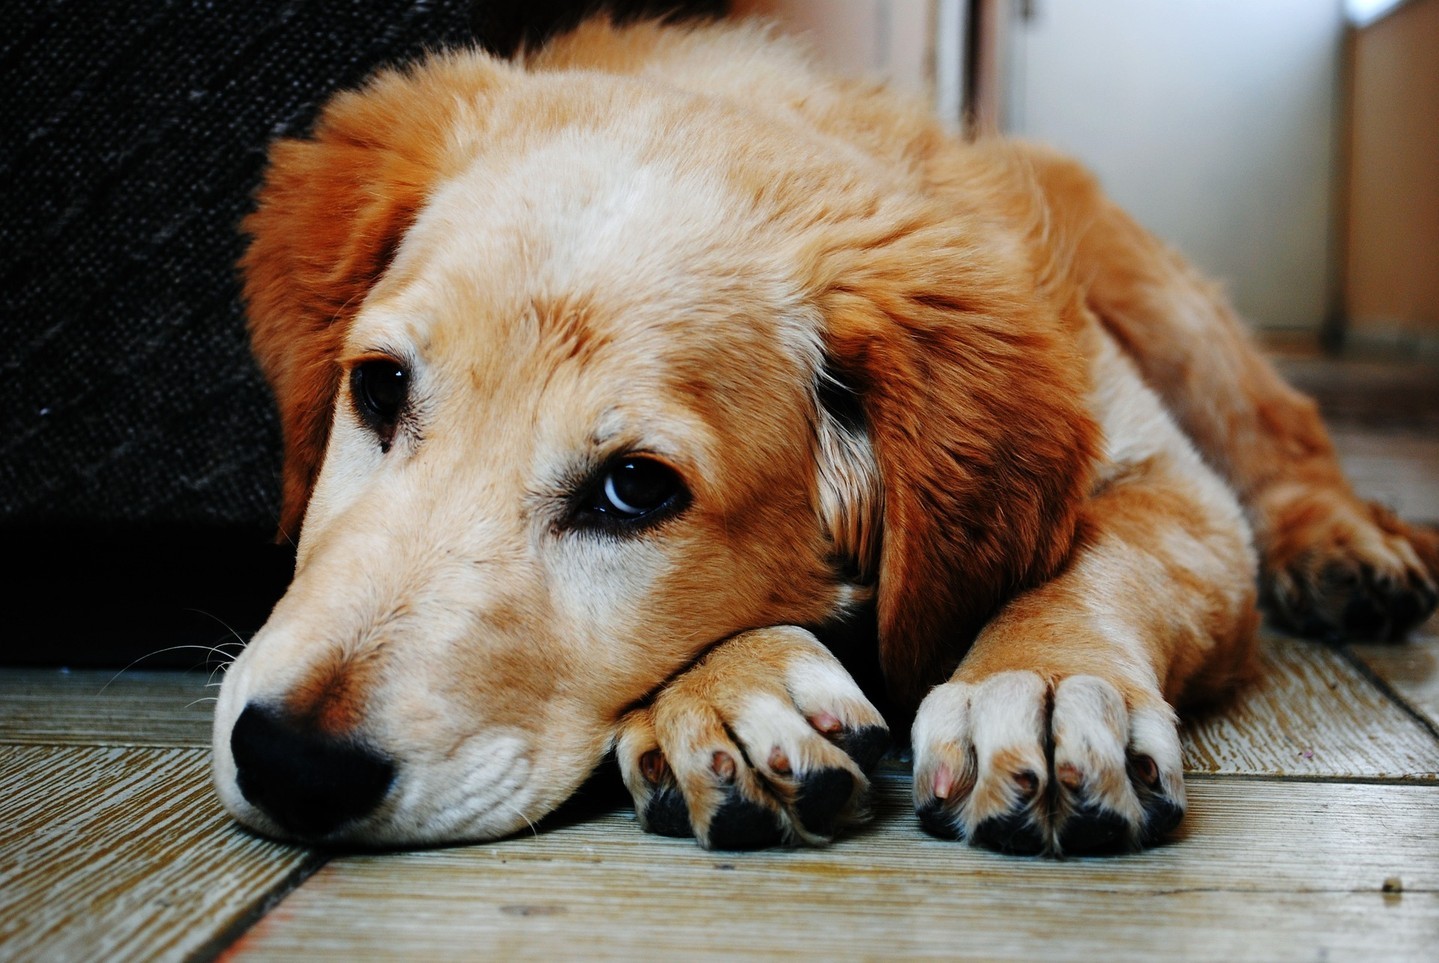 Recent studies have shown that animals can suffer from stress much like human...